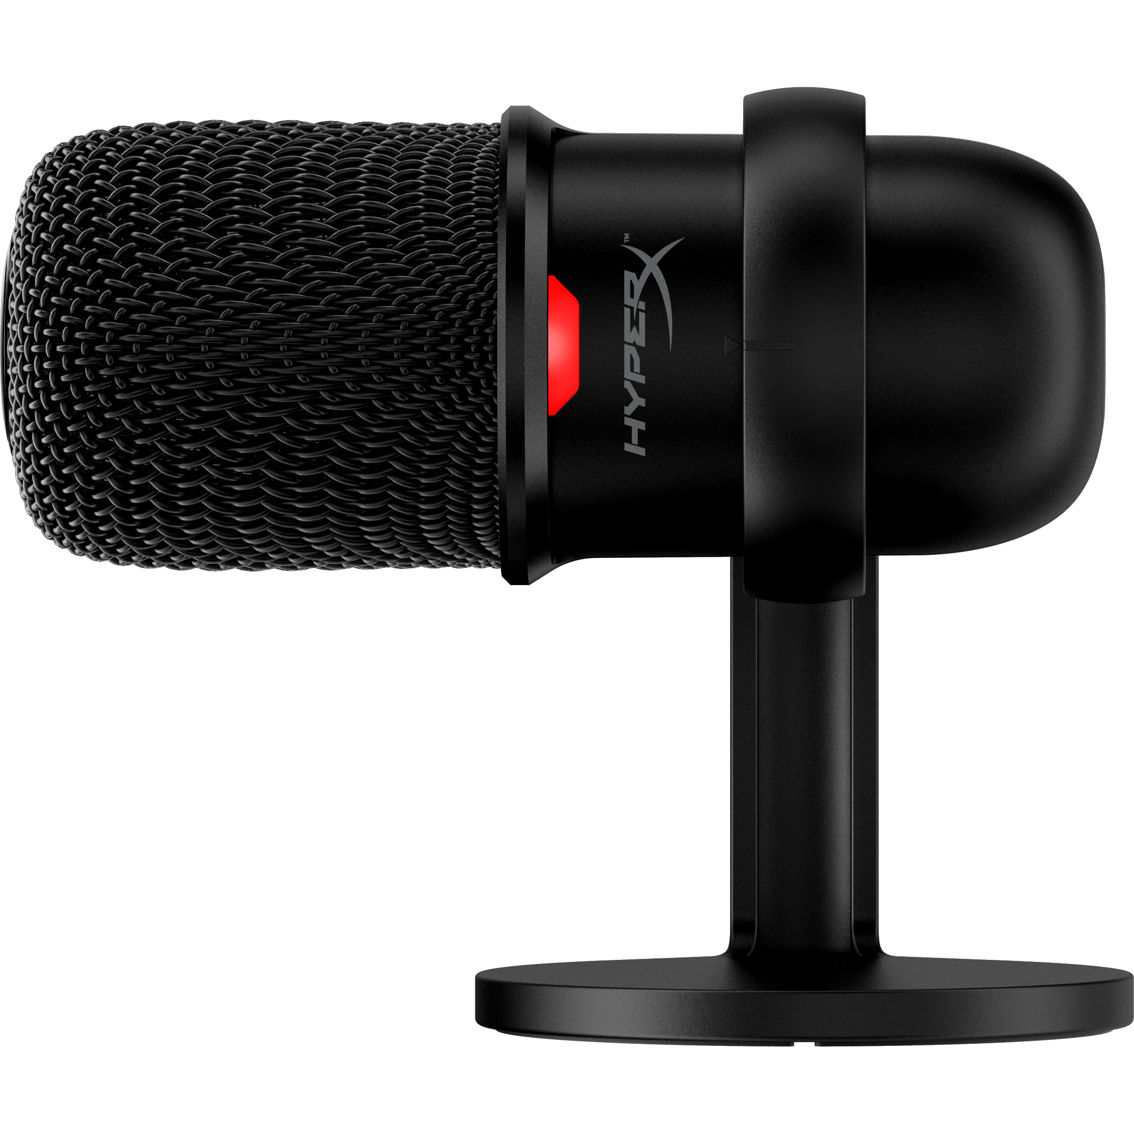 HyperX SoloCast USB Microphone - Image 3 of 3